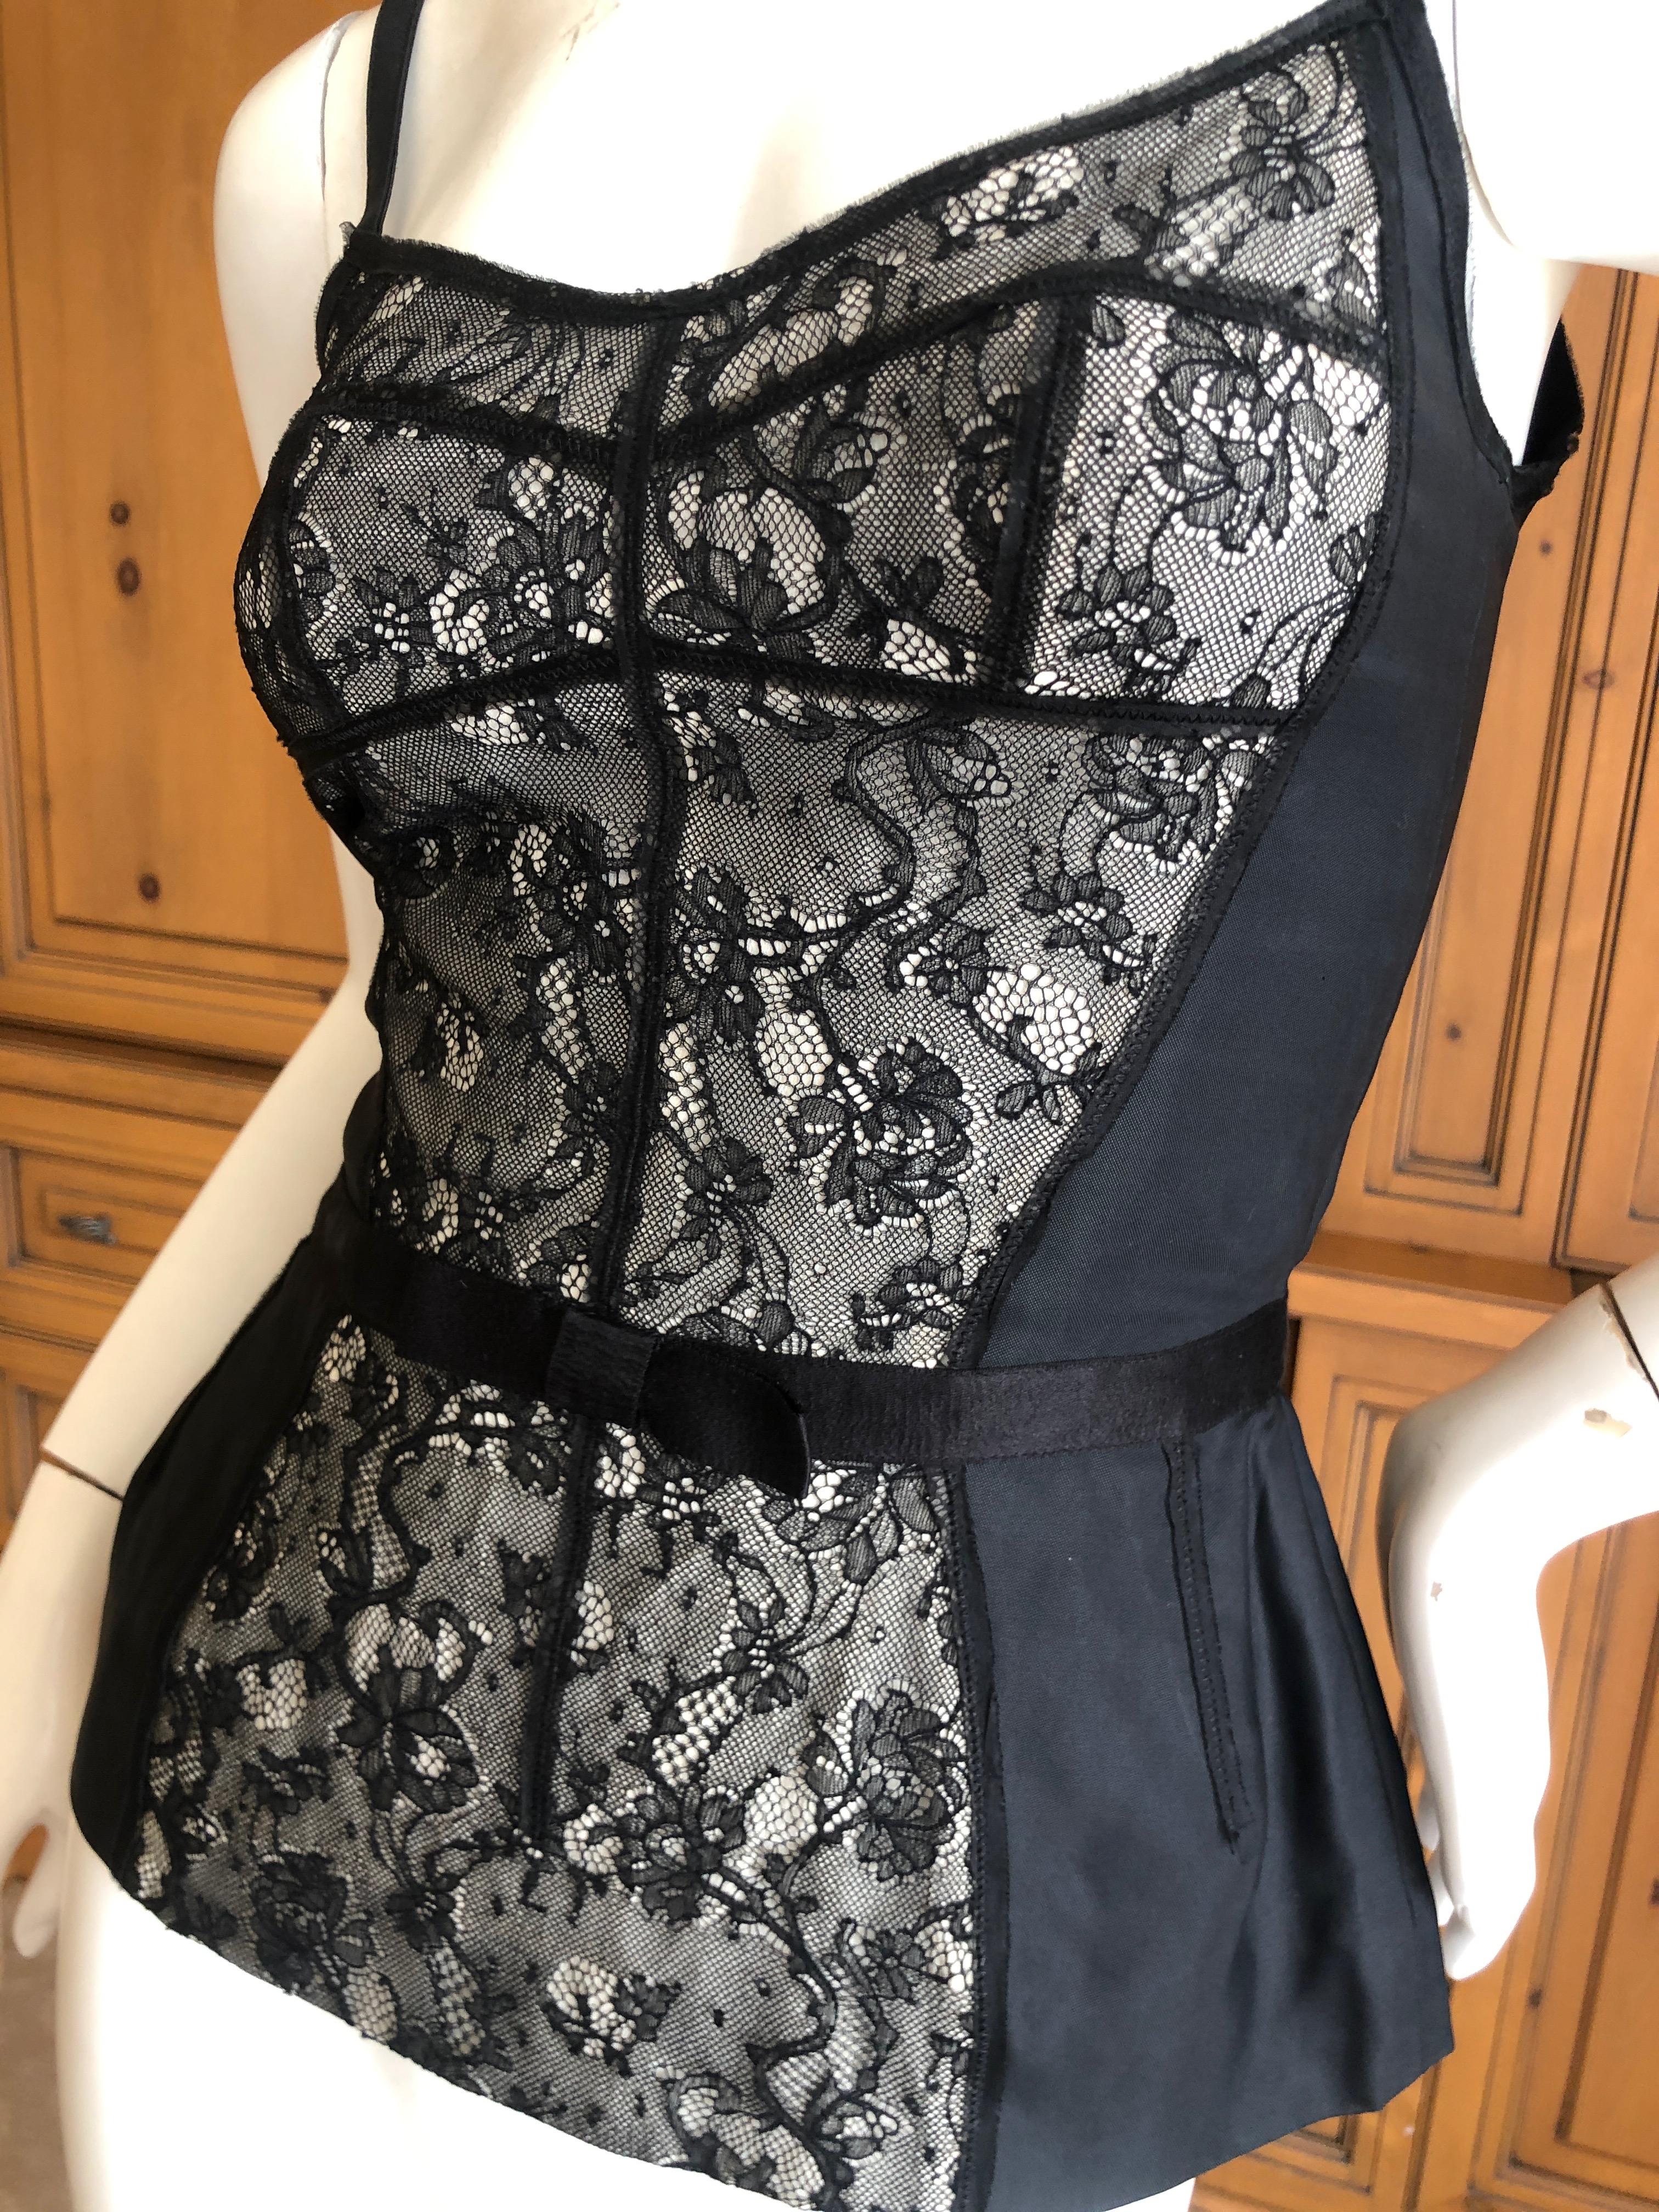 D&G Dolce & Gabbana Vintage Black Lace Corset Top In Excellent Condition For Sale In Cloverdale, CA